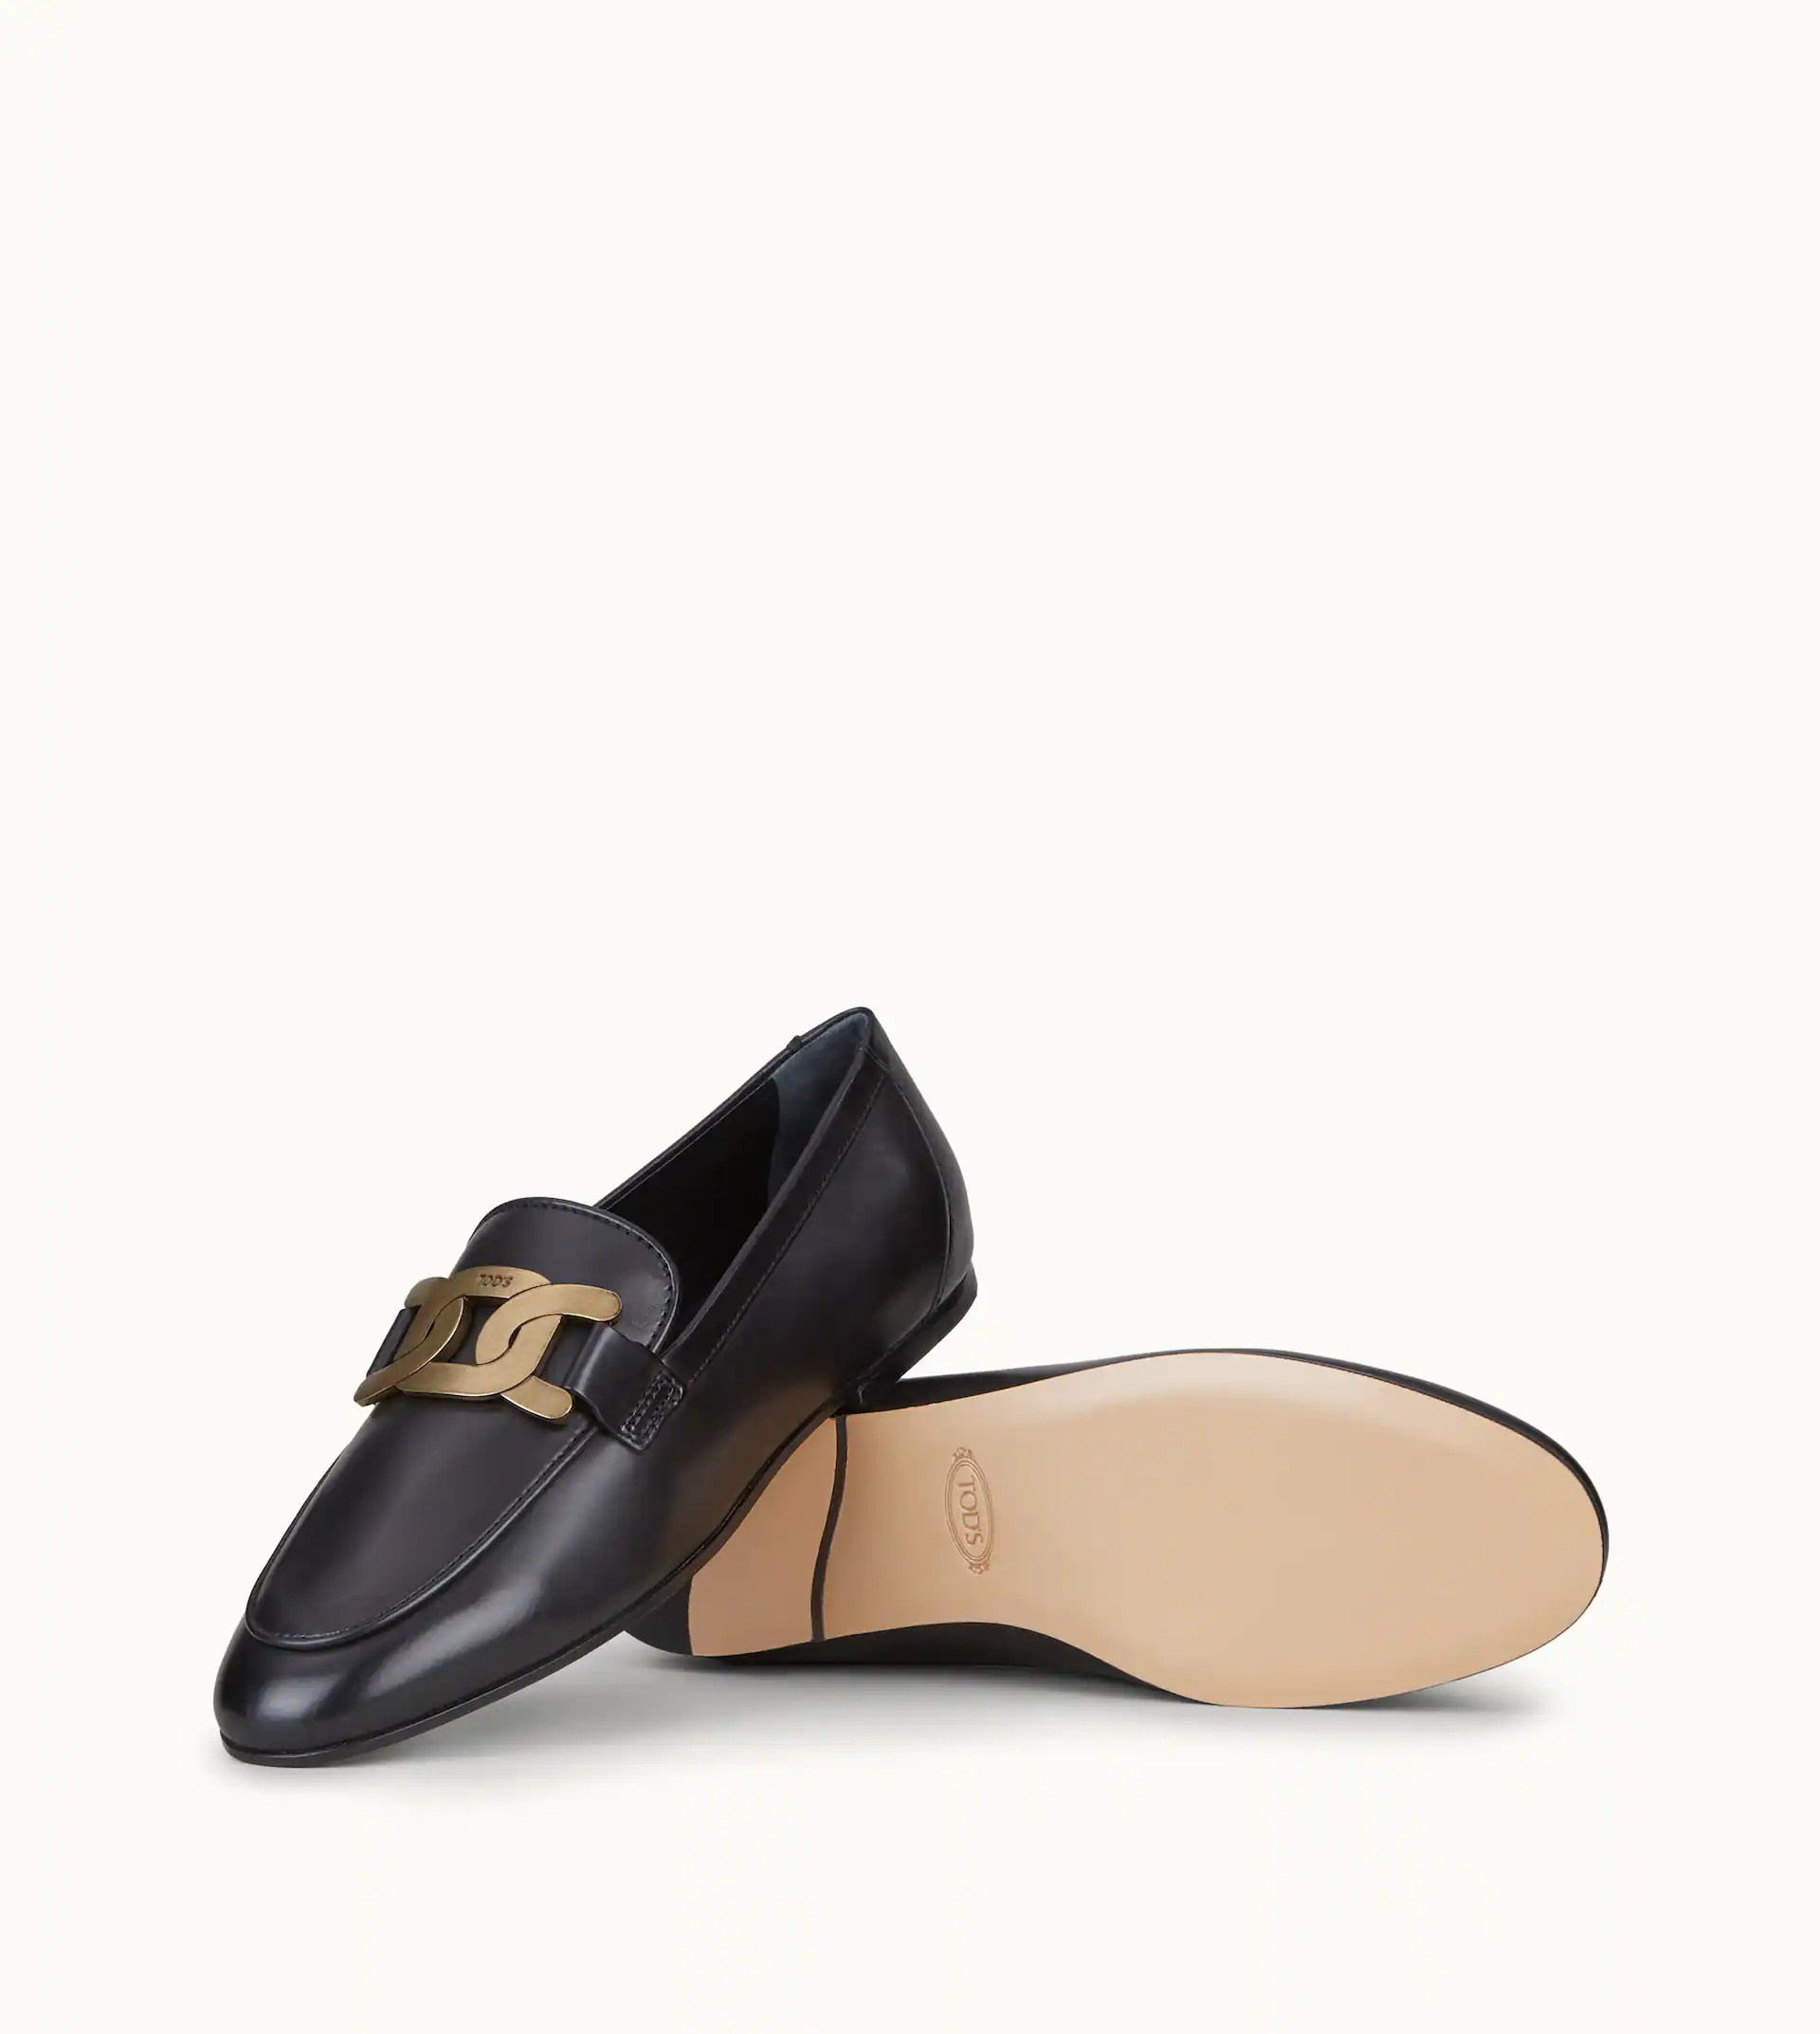 KATE LOAFERS IN LEATHER - BLACK - 6